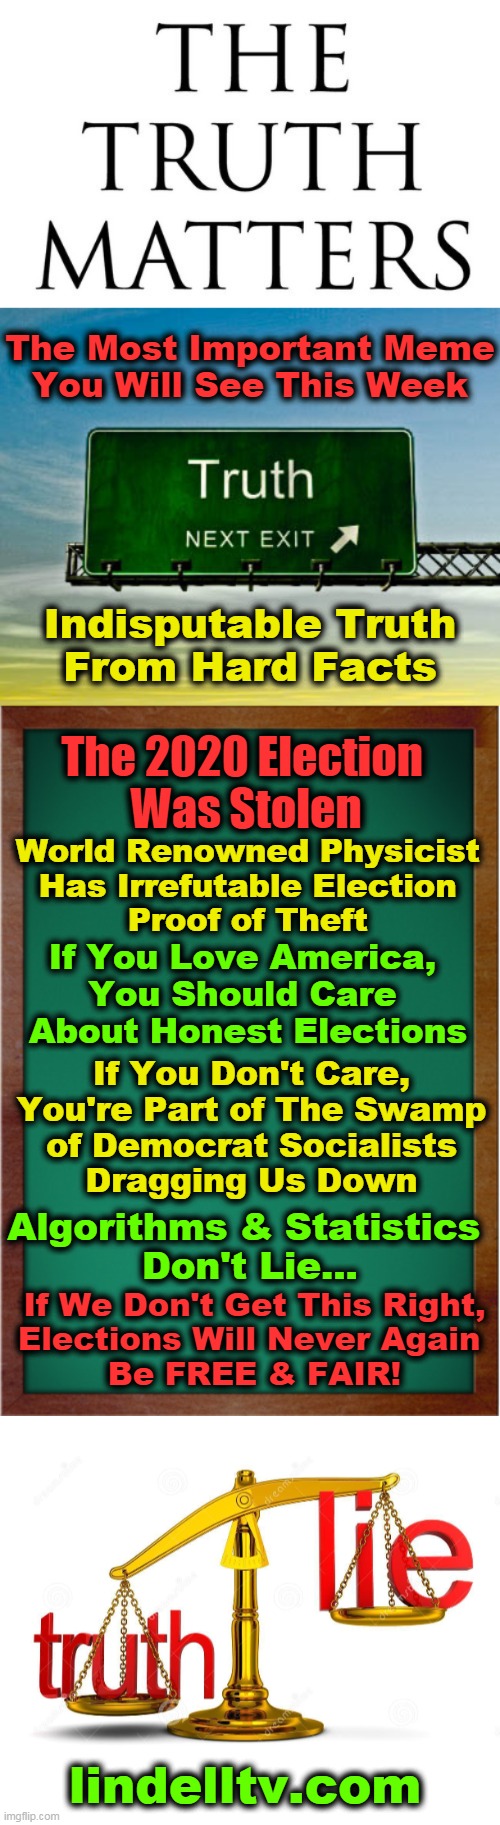 Proof That 2020 Election Was The Biggest Cyber-Crime in World History | The Most Important Meme
You Will See This Week; Indisputable Truth
From Hard Facts; The 2020 Election 
Was Stolen; World Renowned Physicist 
Has Irrefutable Election 
Proof of Theft; If You Love America, 
You Should Care 
About Honest Elections; If You Don't Care,
You're Part of The Swamp
of Democrat Socialists
Dragging Us Down; Algorithms & Statistics 
Don't Lie... If We Don't Get This Right,
Elections Will Never Again 
Be FREE & FAIR! lindelltv.com | image tagged in politics,election 2020,election fraud,donald trump,facts,future of america | made w/ Imgflip meme maker